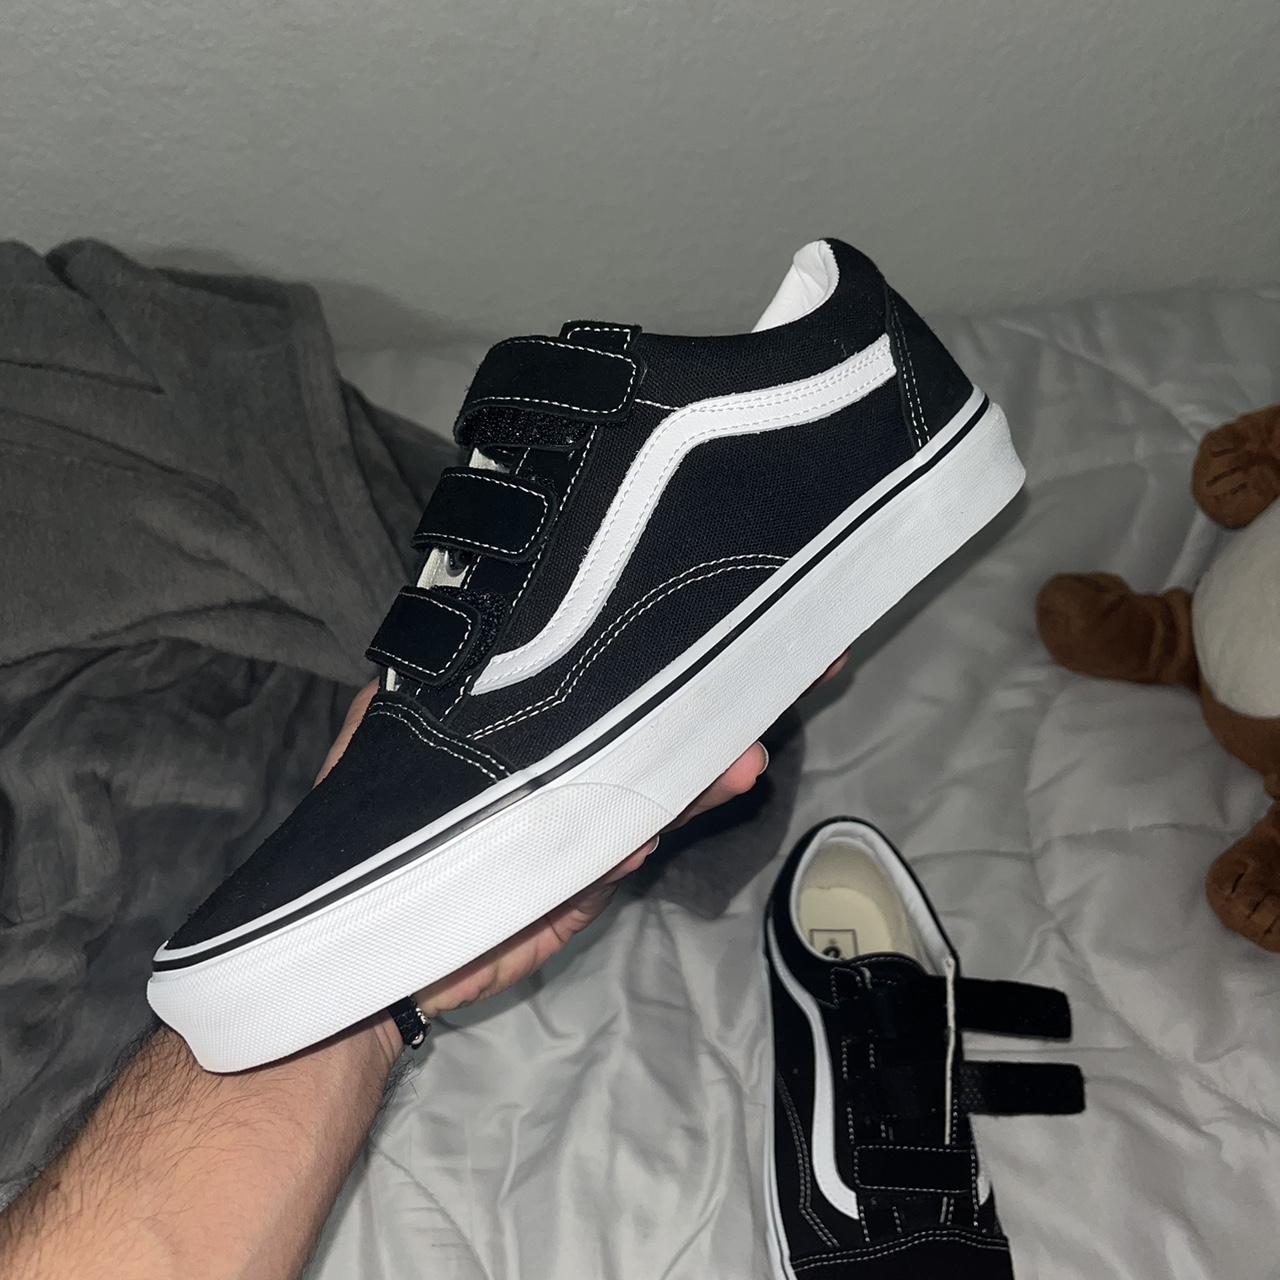 Vans Men's Black and White Trainers